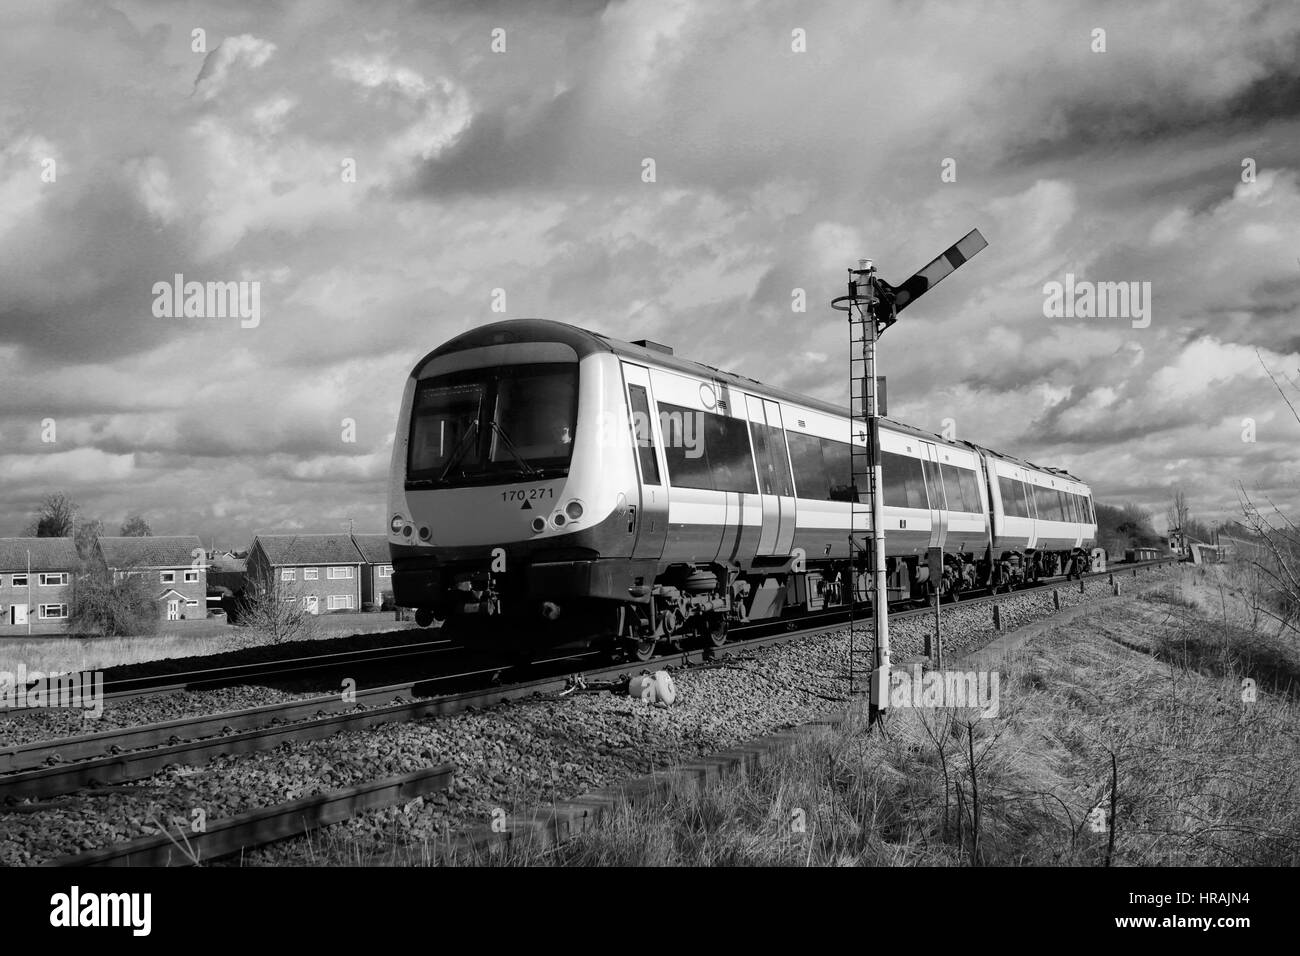 Abellio Greater Anglia, Turbostar 170271 passing an unmanned level crossing, Whittlesey town, Fenland, Cambridgeshire, England Stock Photo